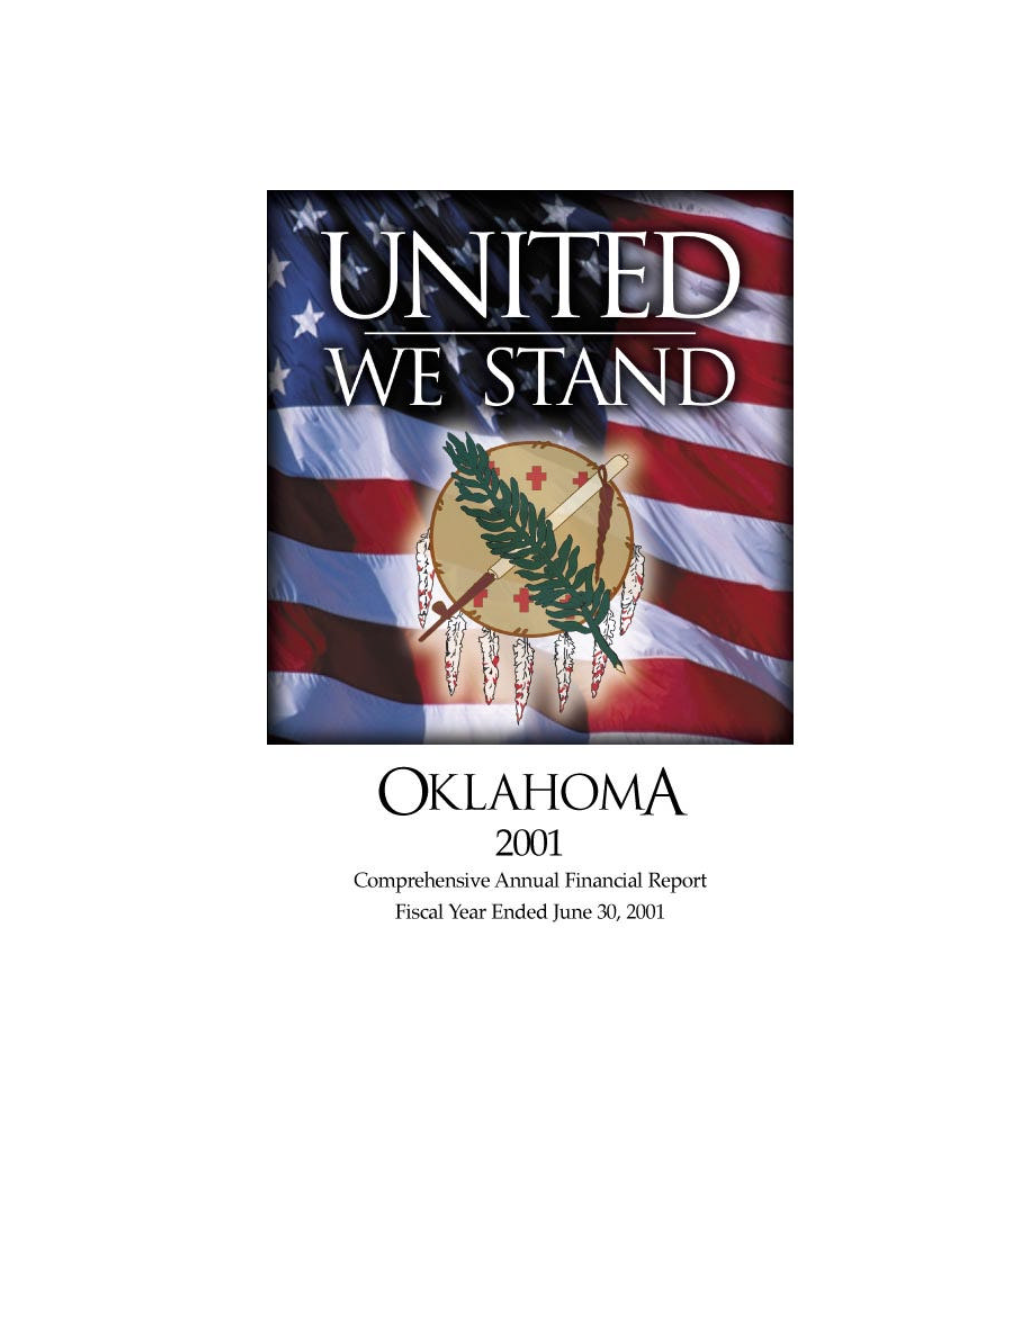 State of Oklahoma Comprehensive Annual Financial Report (CAFR)